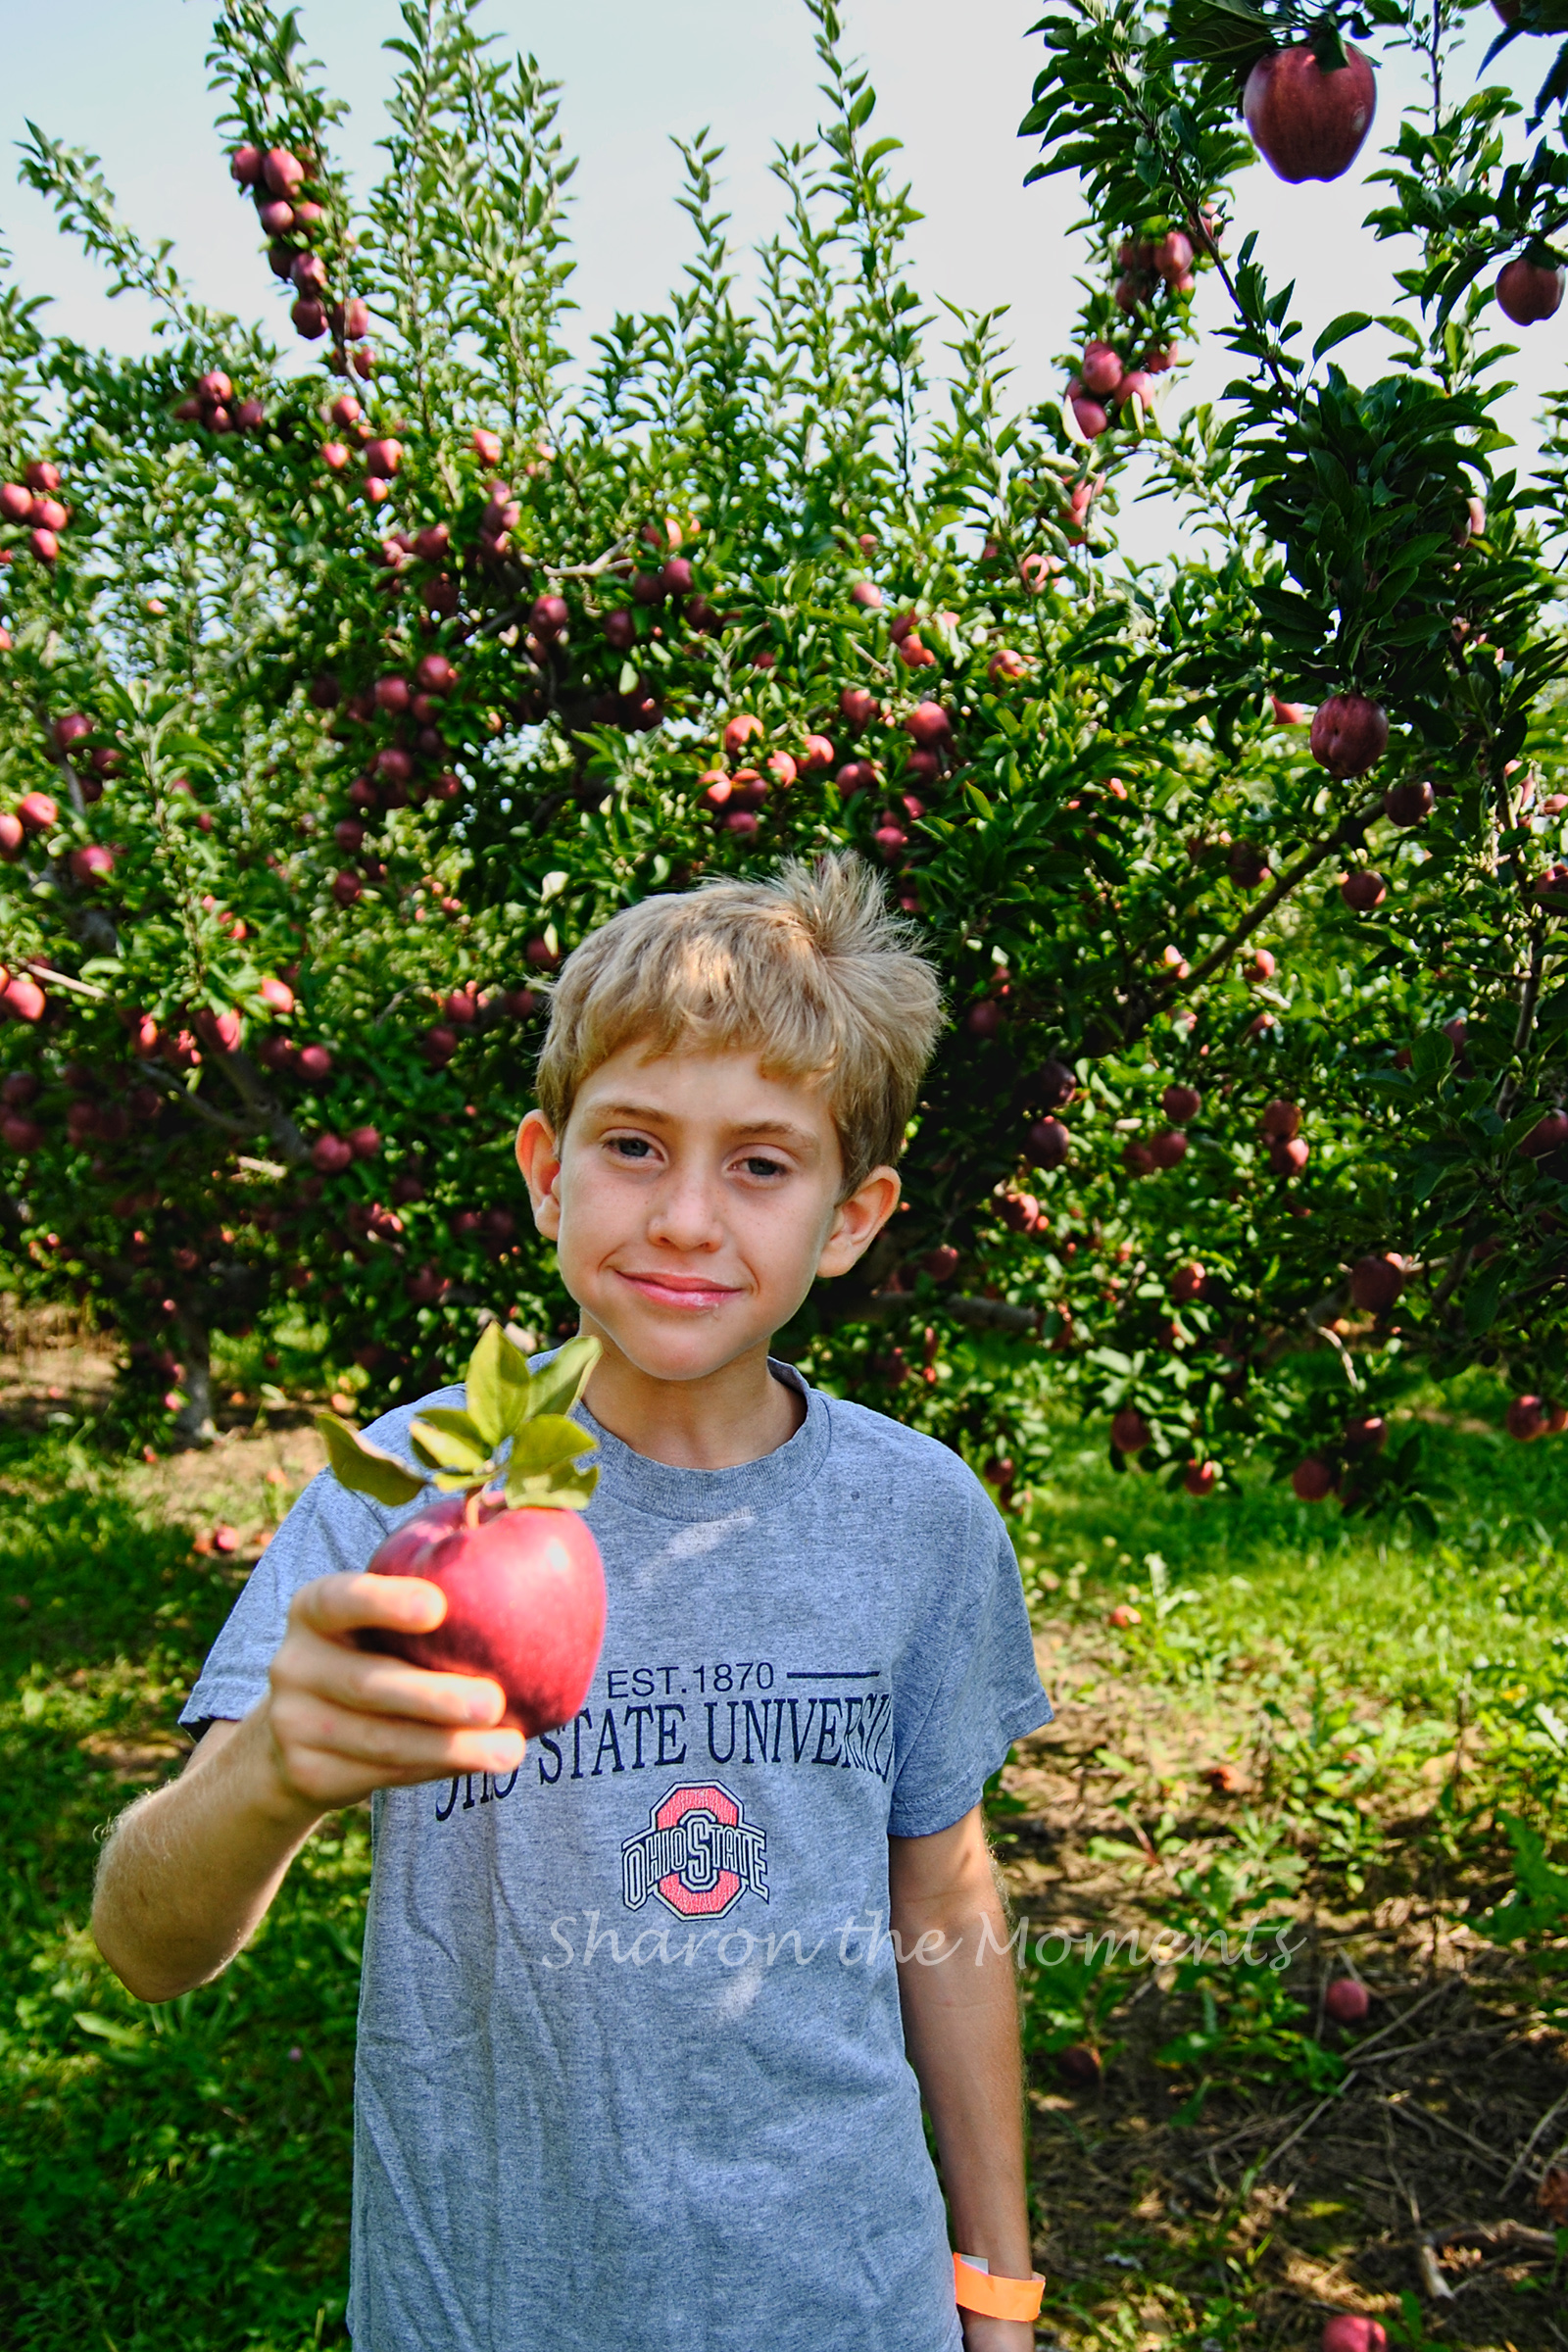 September Weekend at Lynd Fruit Farm Apple Orchard| Sharon the Moments Blog